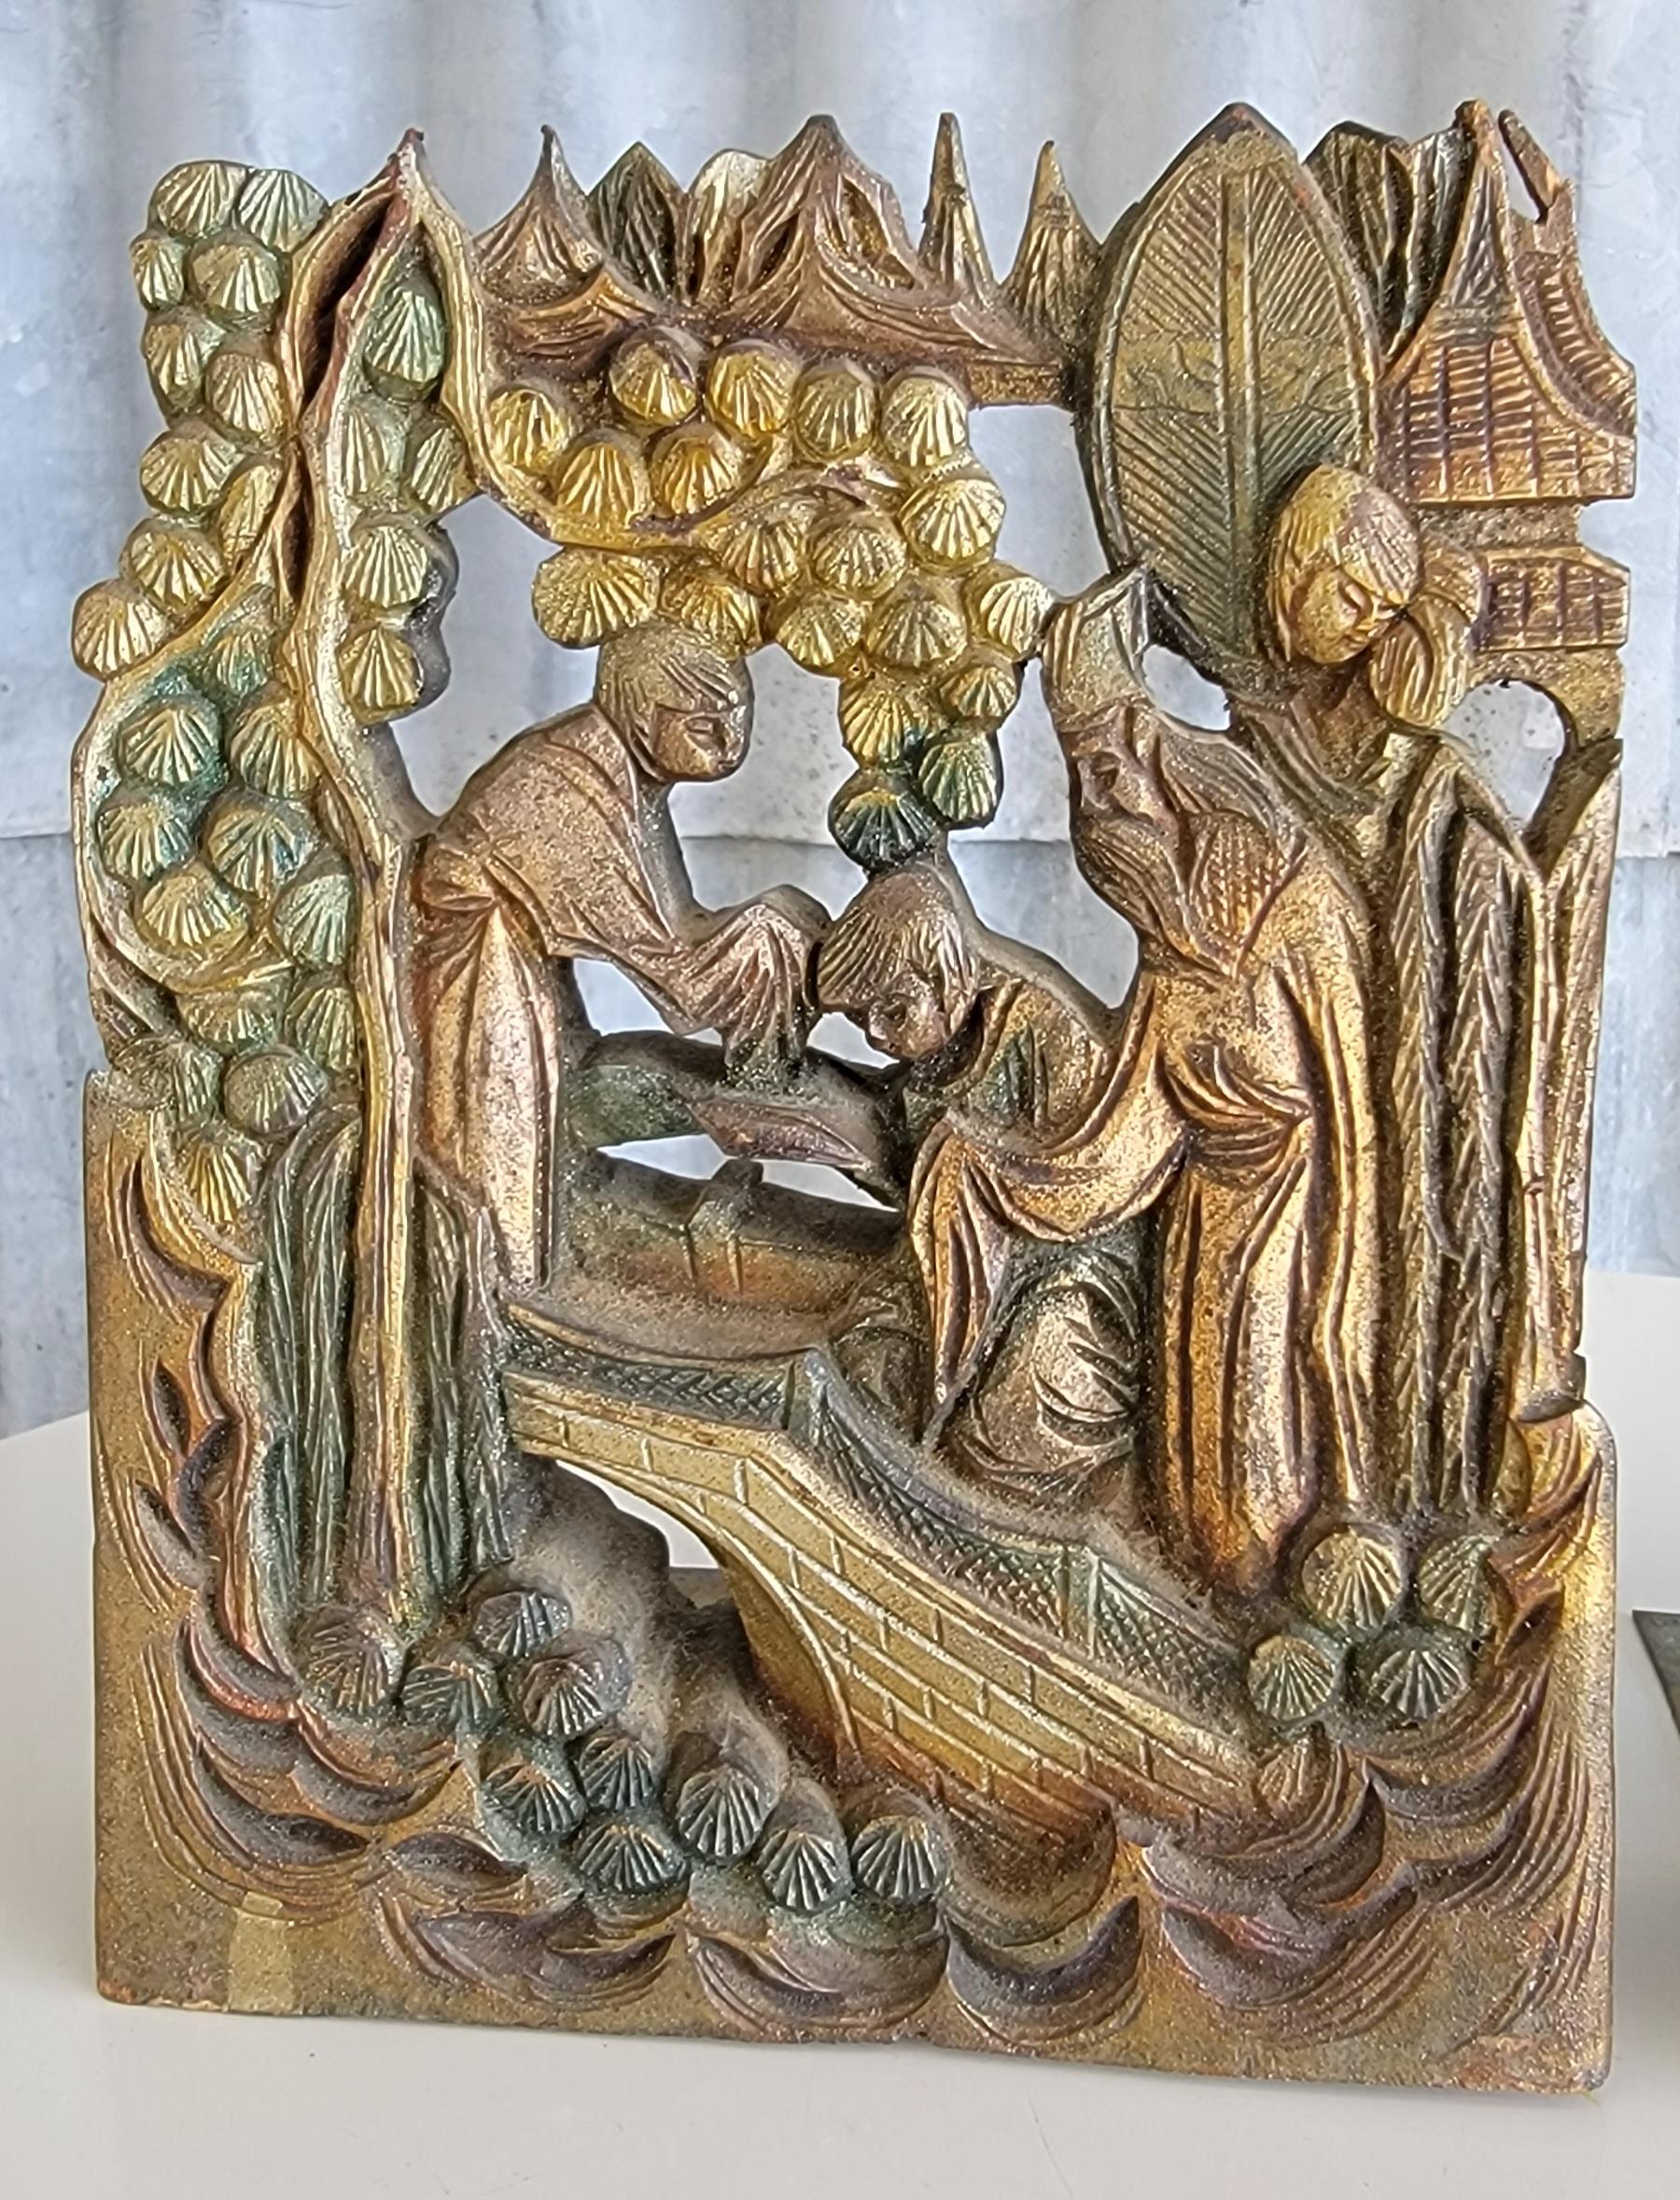 Hand carved bookends with a marketplace and figures motif. Early 20th Century. Original painted finish.